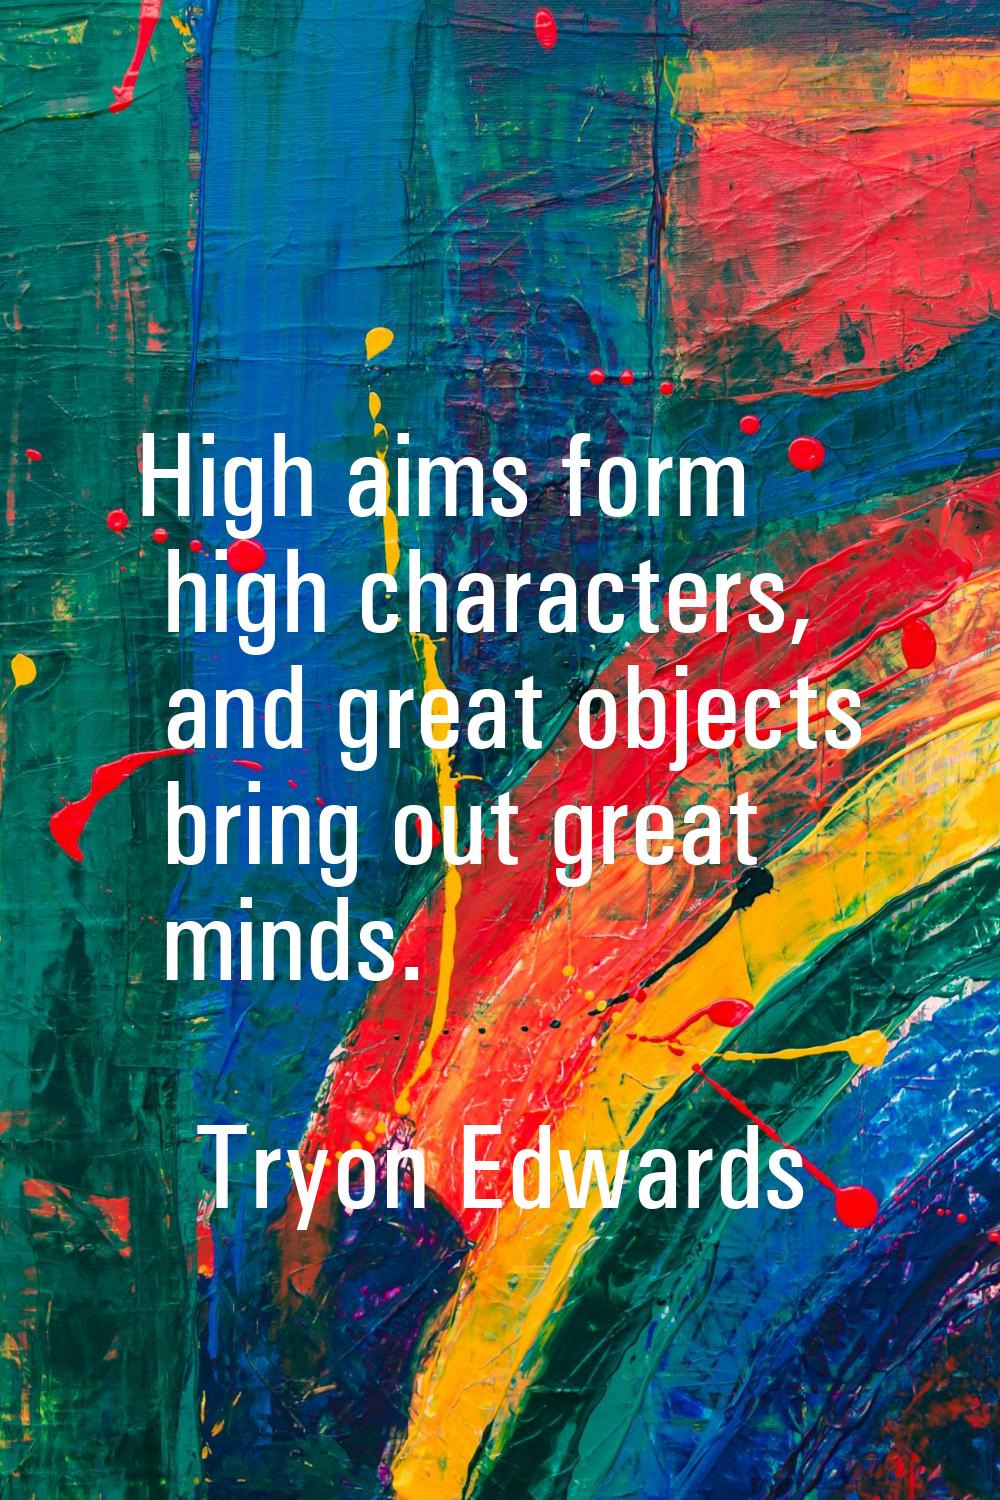 High aims form high characters, and great objects bring out great minds.